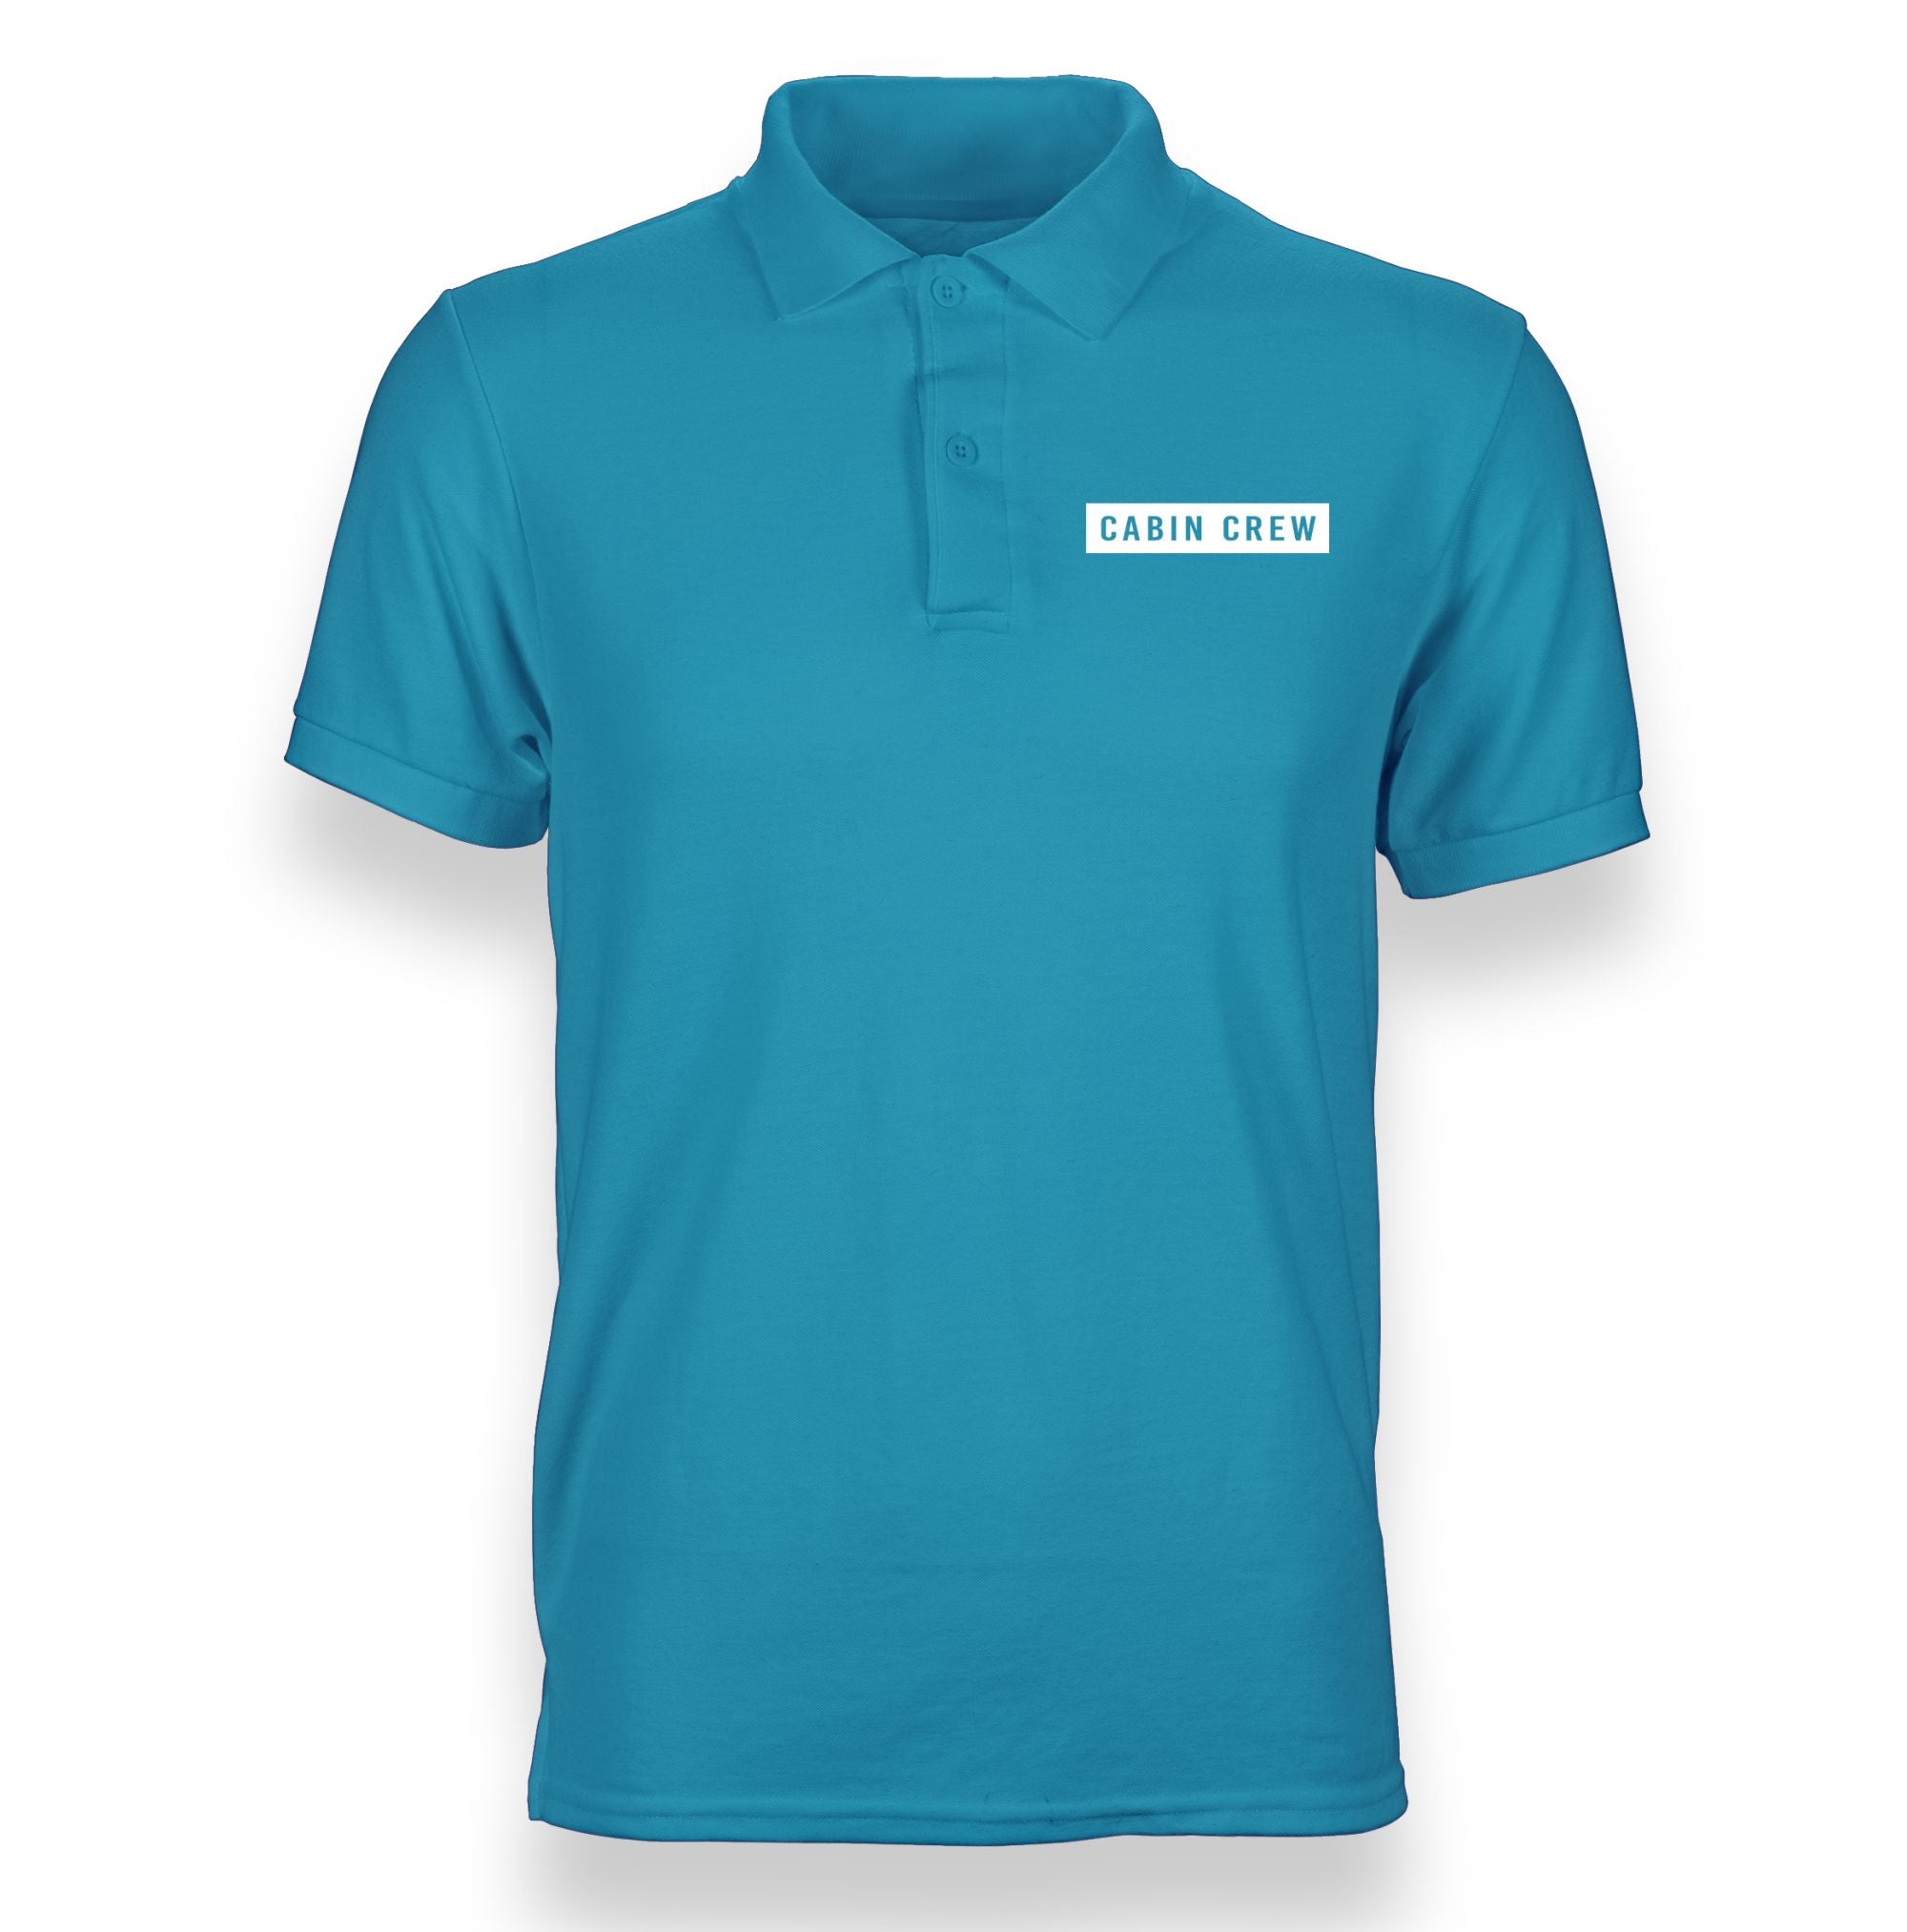 Cabin Crew Text Designed "WOMEN" Polo T-Shirts